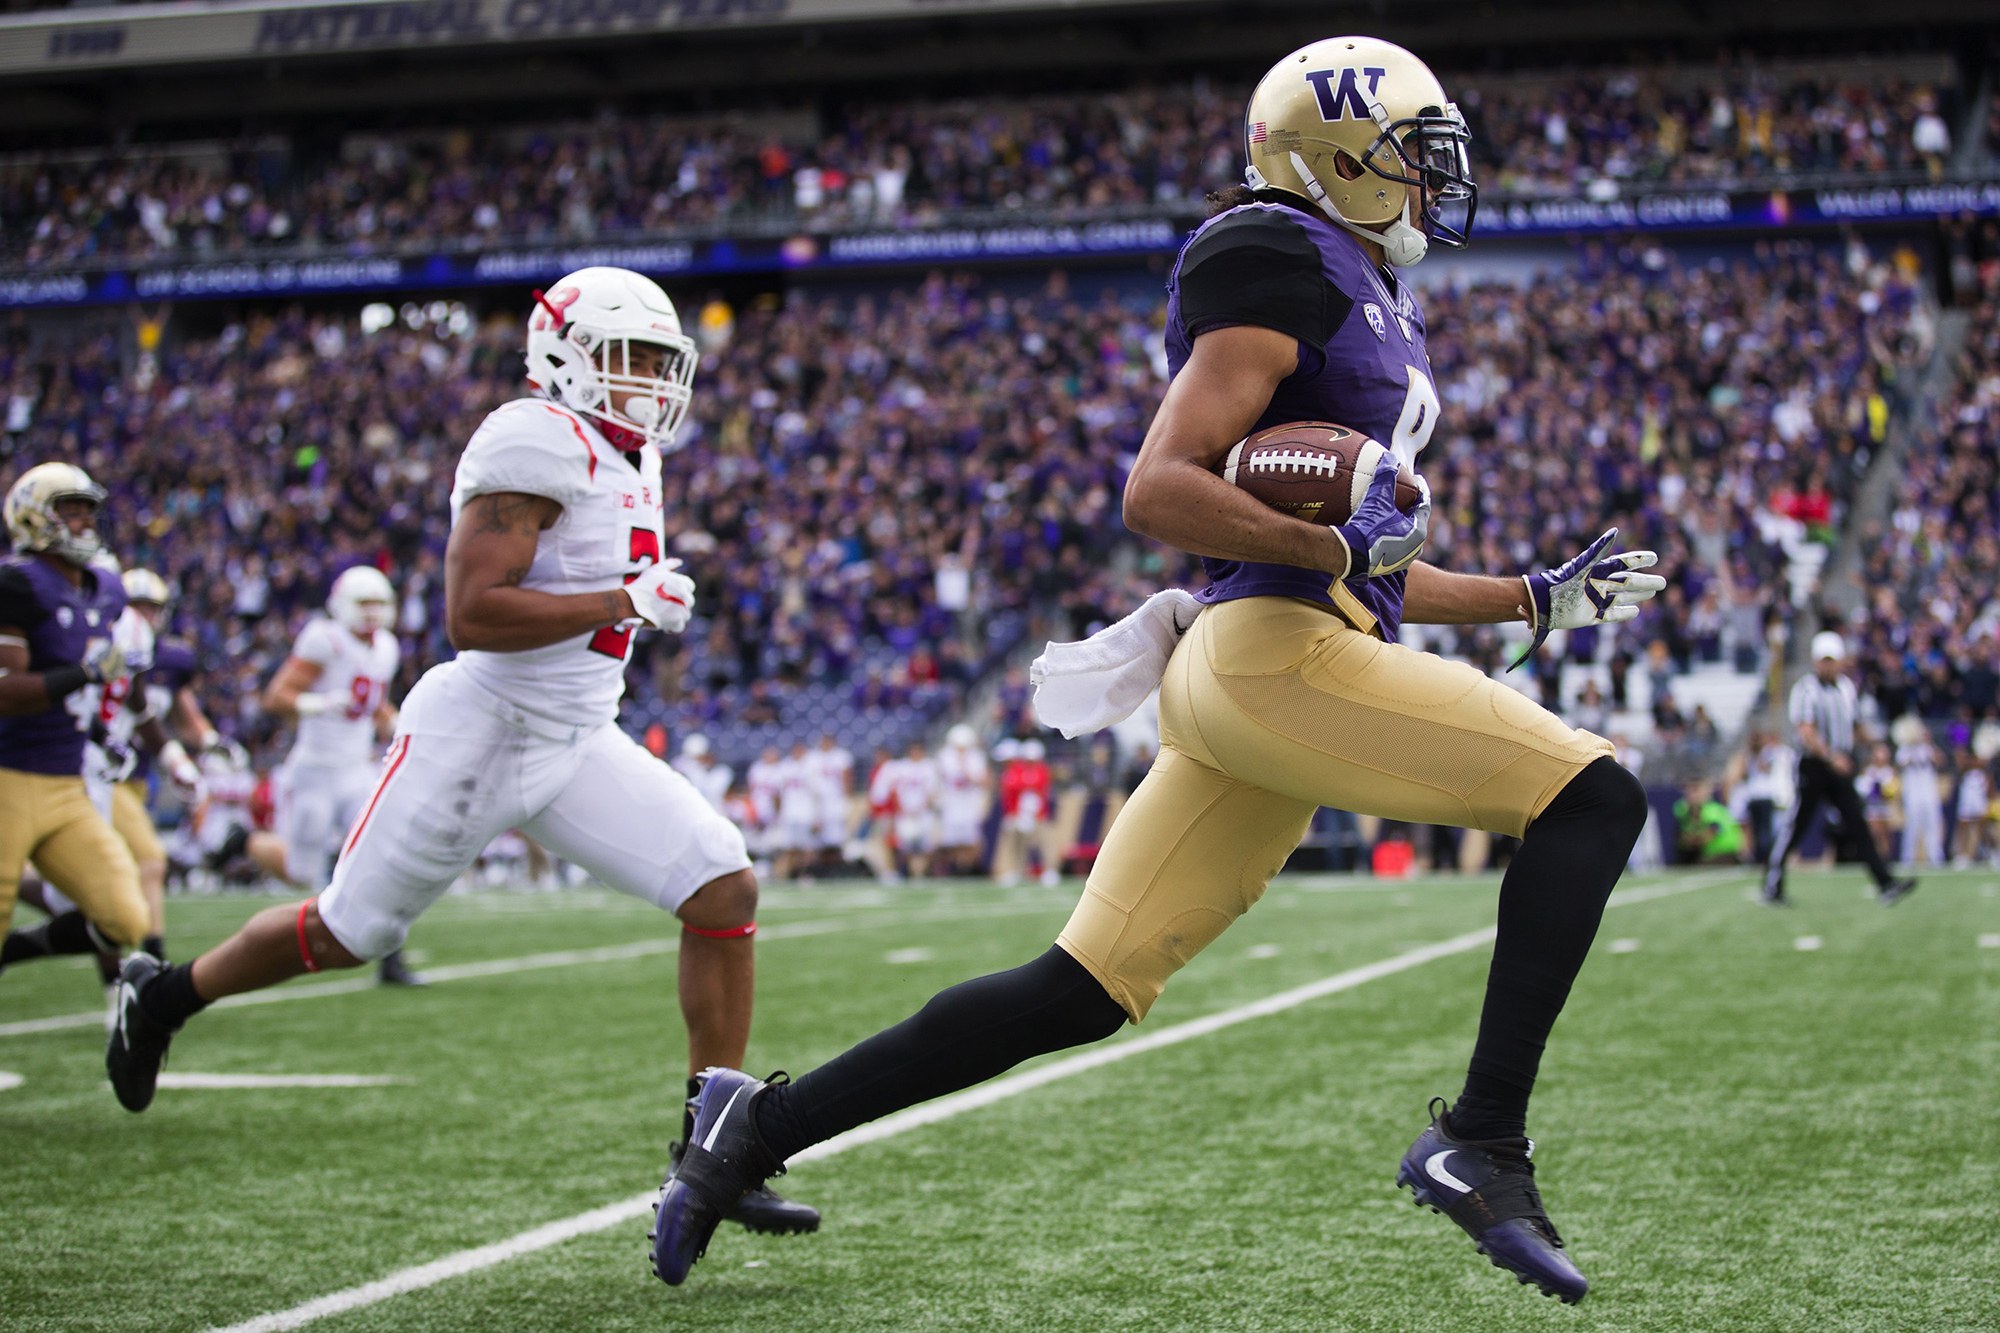 Huskies make opening statement in rout of Rutgers